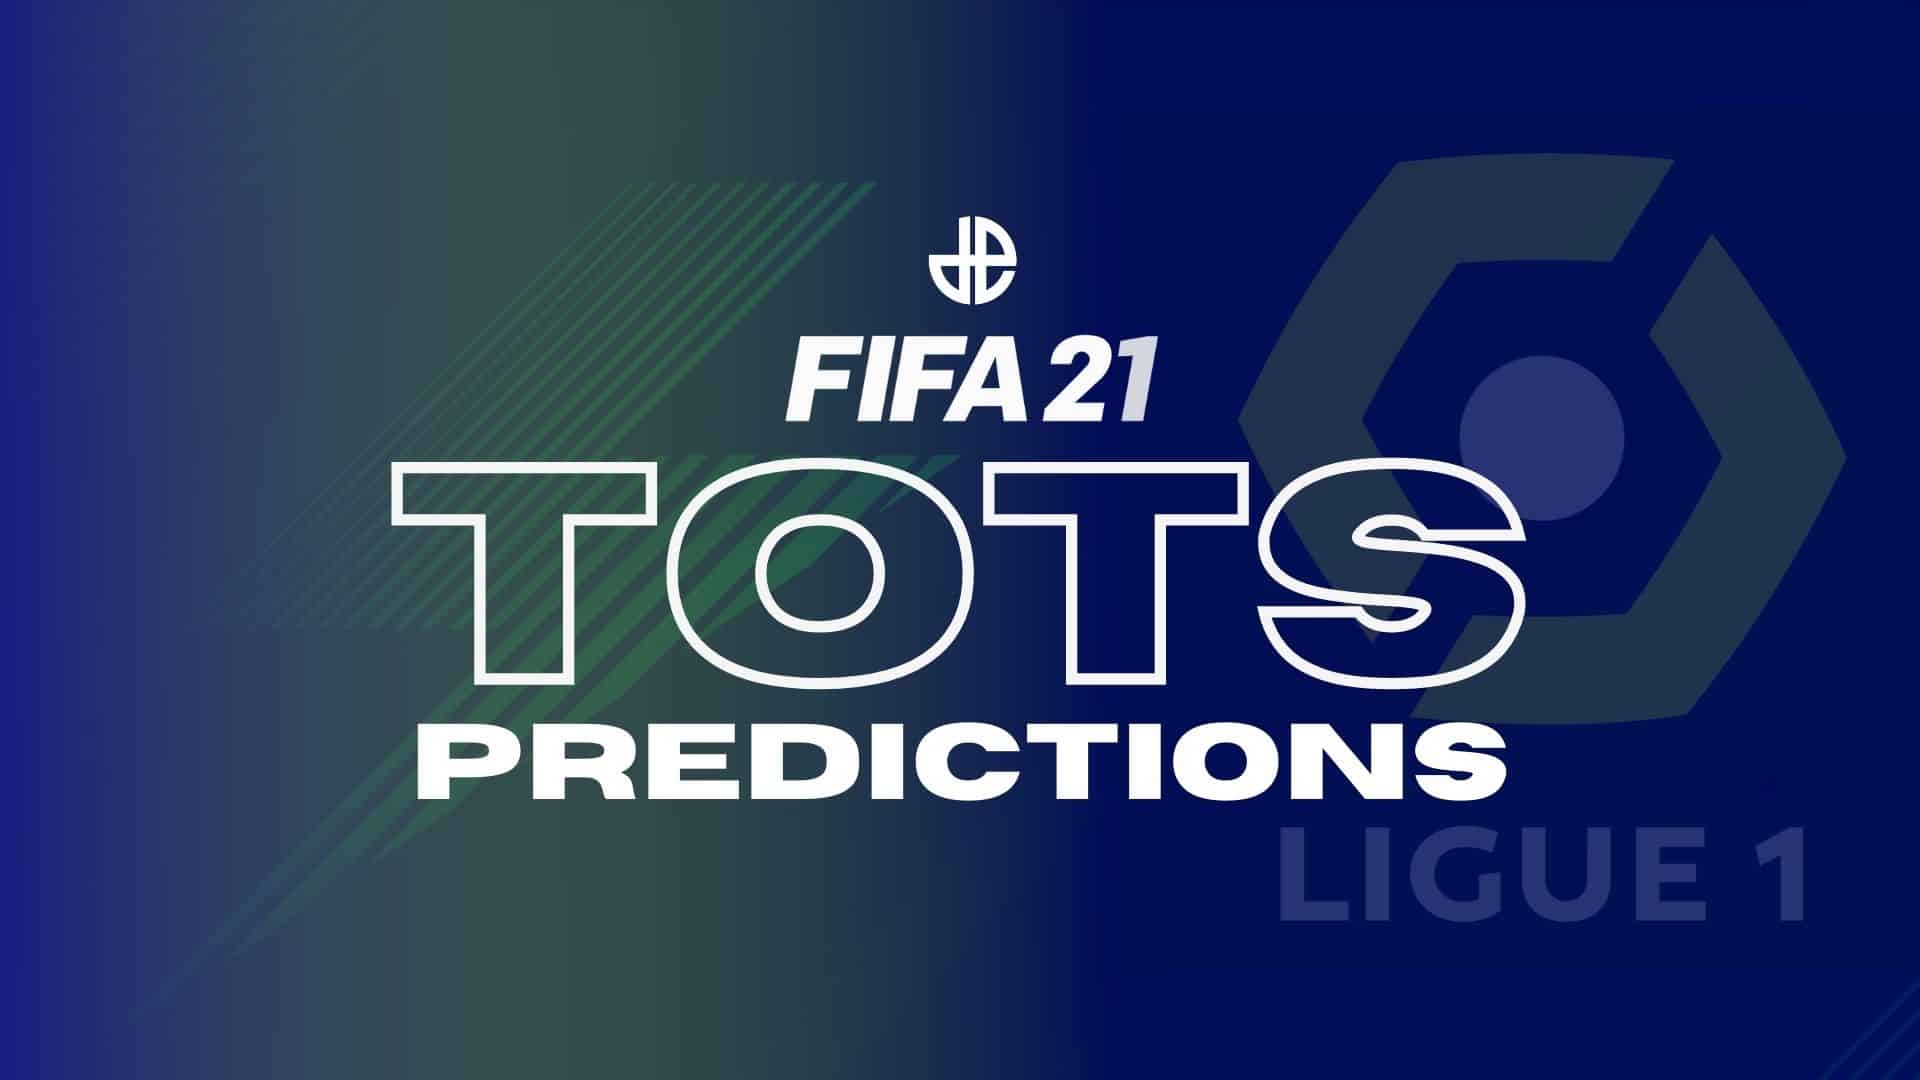 Ligue 1 FIFA 21 TOTS Ultimate Team predictions revealed.